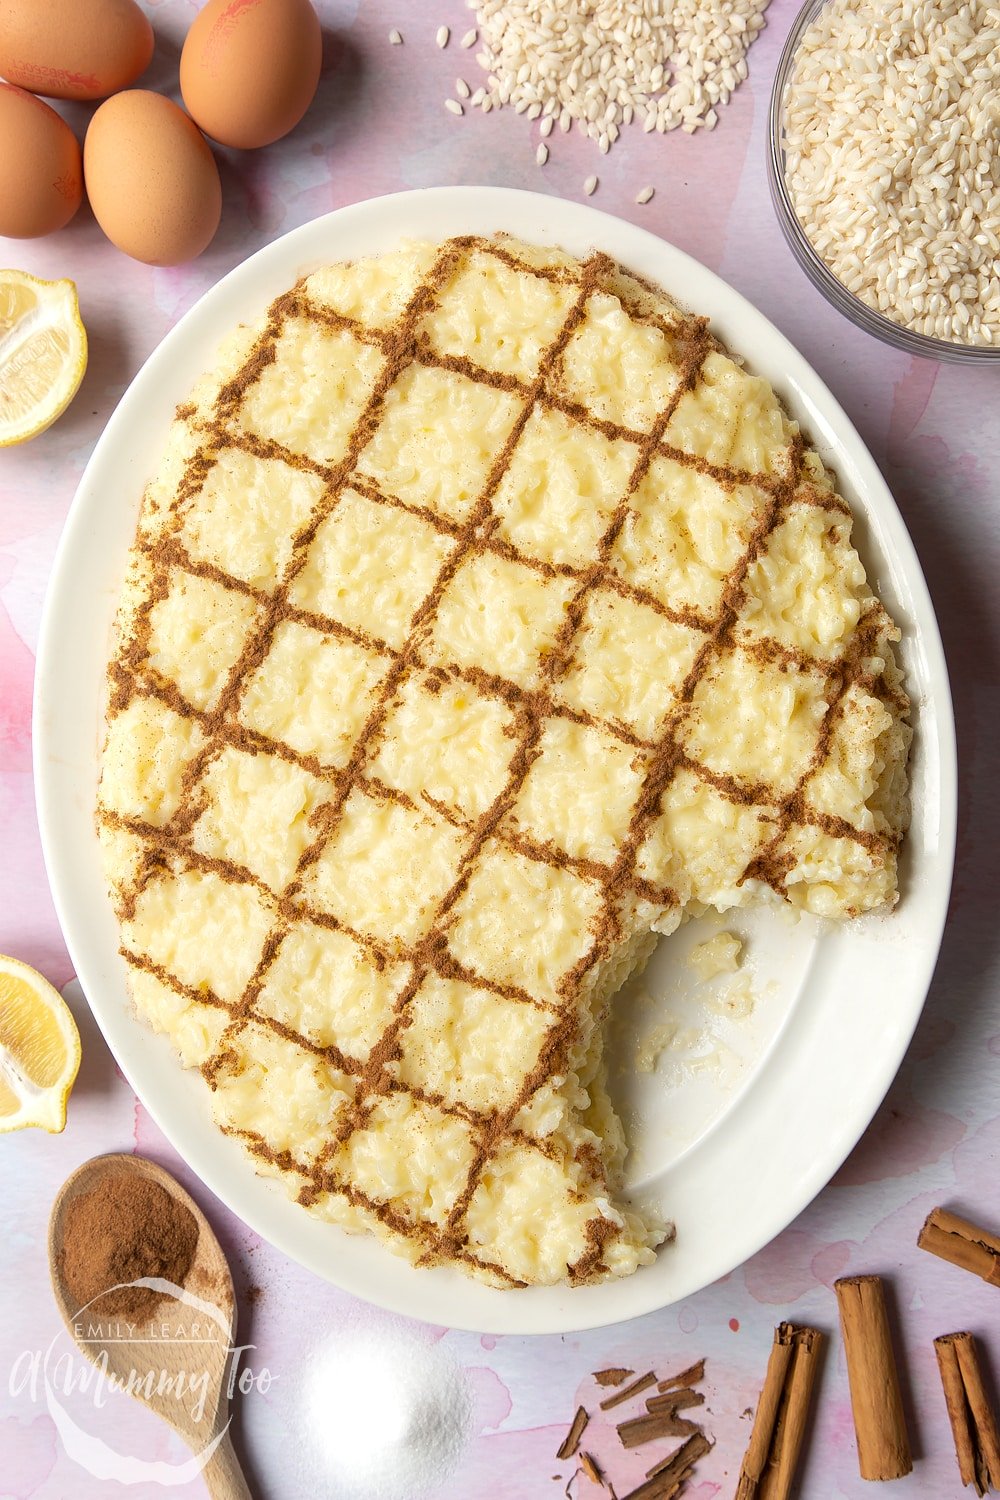 Arroz Doce (Portuguese rice pudding) on a large, white, oval-shaped plate. The rice pudding is decorated with ground cinnamon in a crosshatch pattern. Some of the pudding has been taken away.